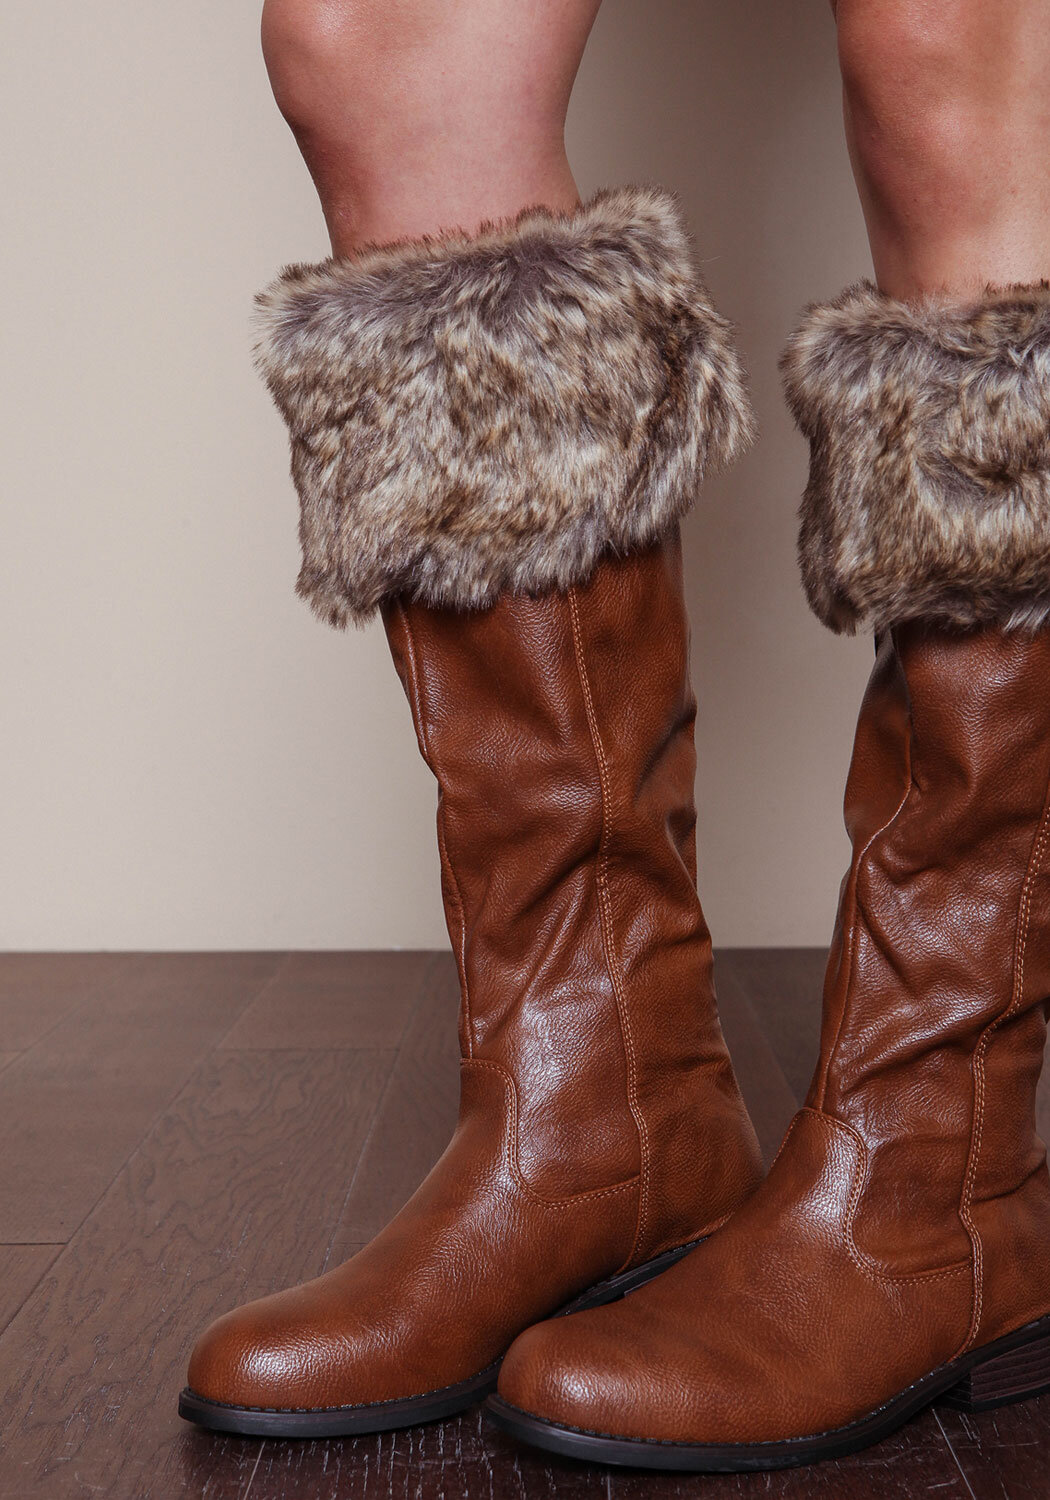 Junior Clothing | Chestnut Faux Fur Knee High Boots | Loveculture.com